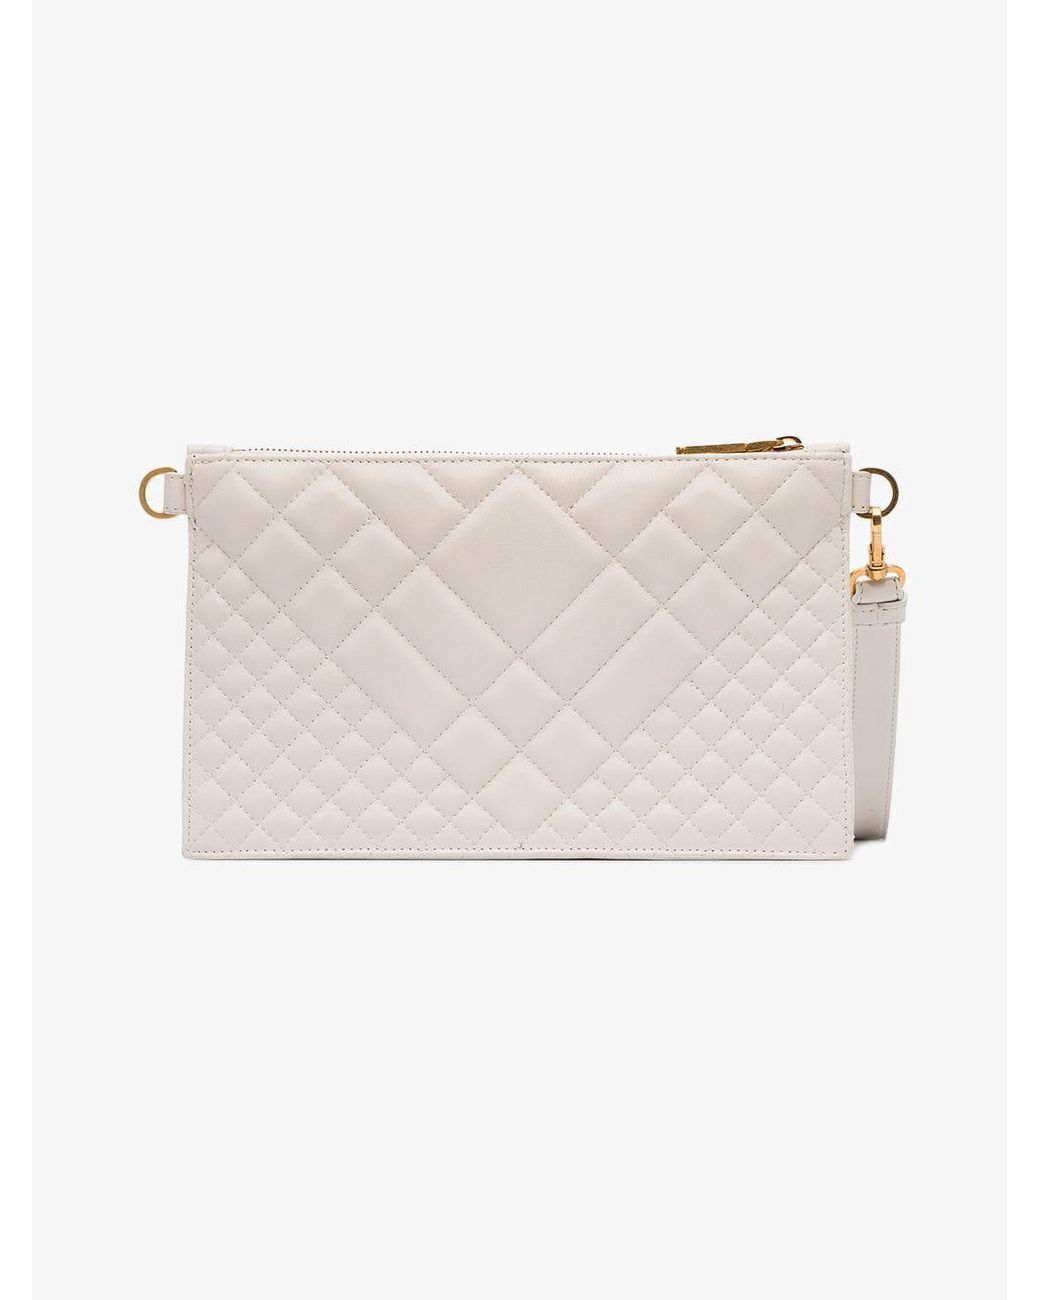 Versace Nude Medusa Quilted Leather Clutch Bag in Natural | Lyst Australia